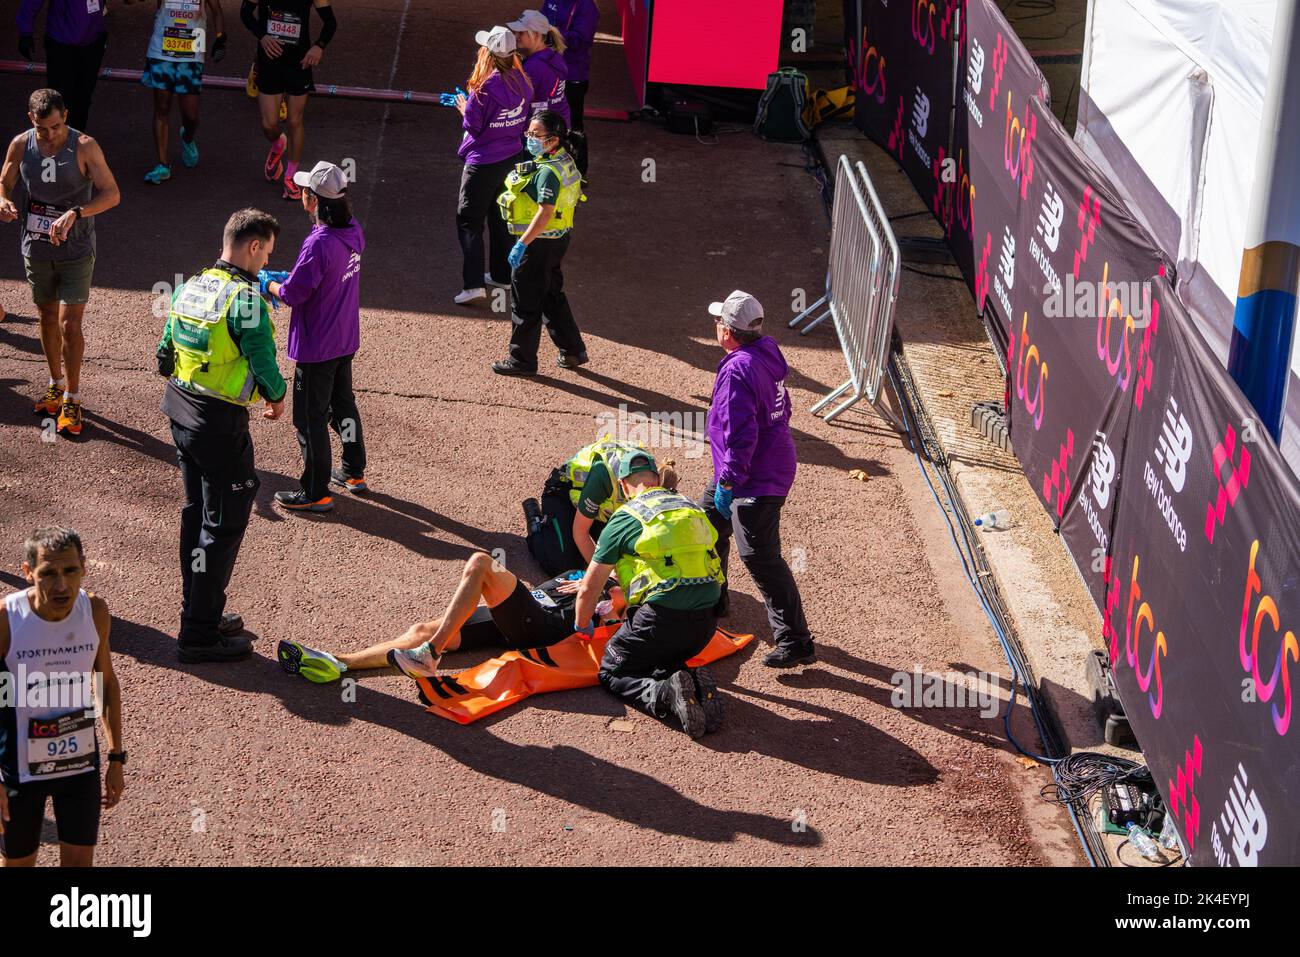 London UK. 2 October 2022 . A marathon runner  is attended  by paramedics after crossing the finishing line at The Mall .More than  40,000 athletes including  elite  runners, club runners and fun runners   take  part in the London Marathon sponsored by TCS Tata Consultancy Services over a 26.2 mile course.Credit: amer ghazzal/Alamy Live News. Stock Photo